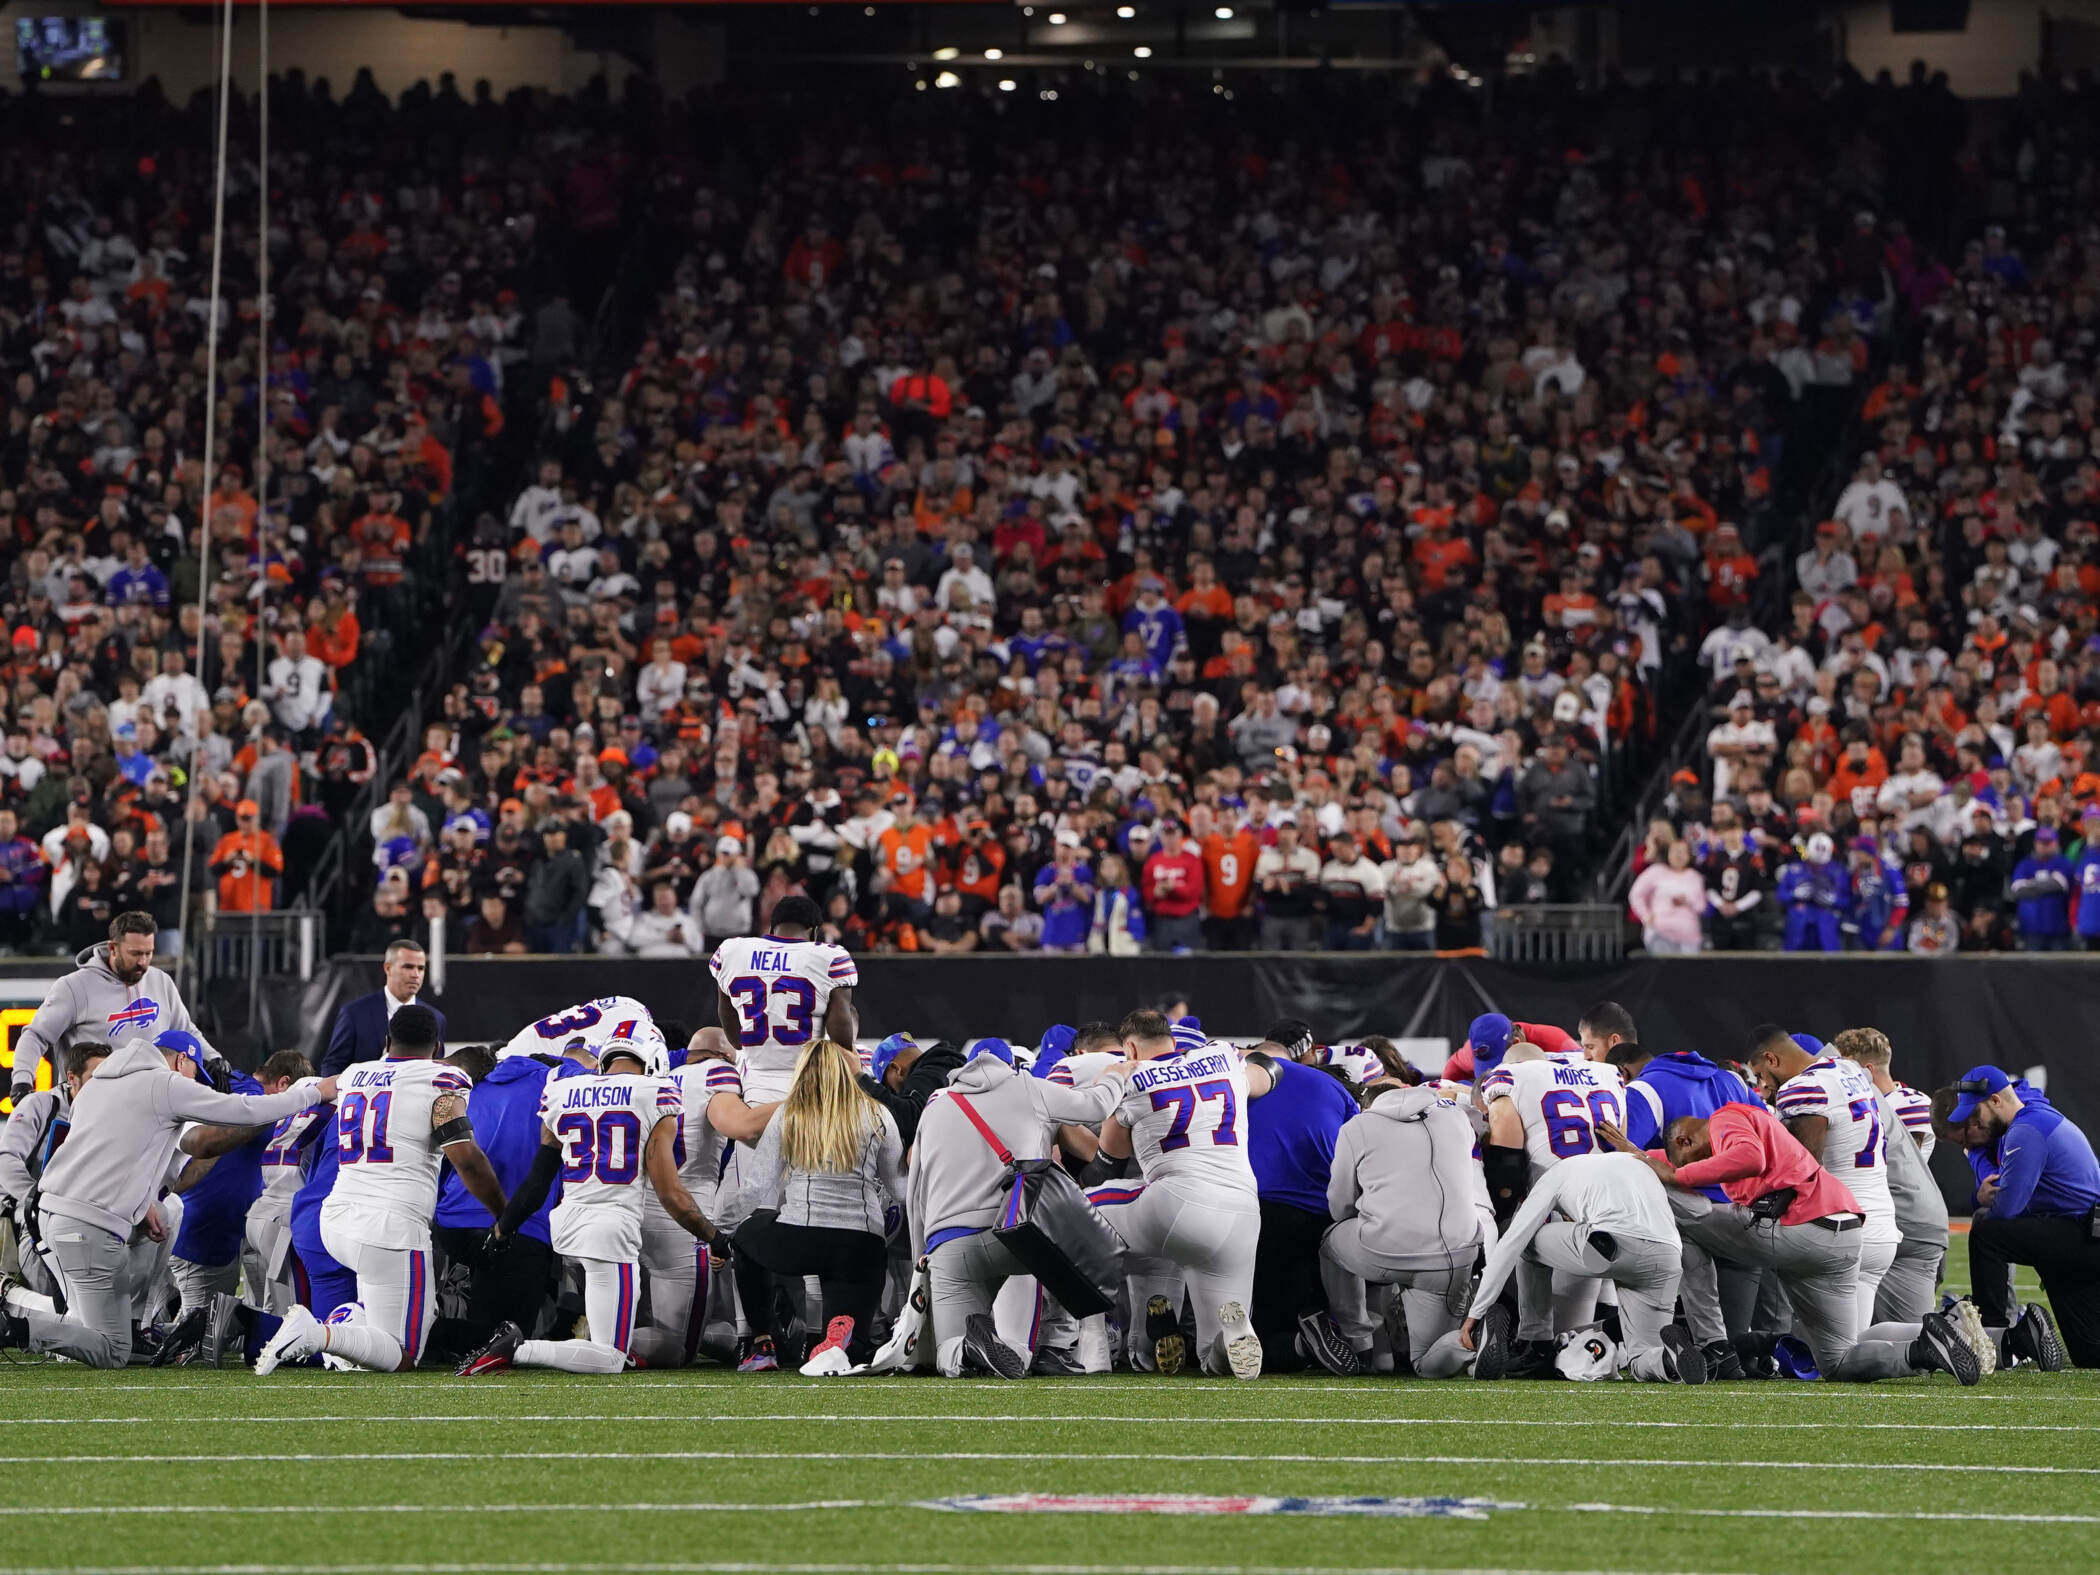 Buffalo Bills players huddle and pray after teammate Damar Hamlin collapsed on the field after making a tackle against the Cincinnati Bengals during the first quarter at Paycor Stadium on Monday in Cincinnati, Ohio. (Dylan Buell/Getty Images)